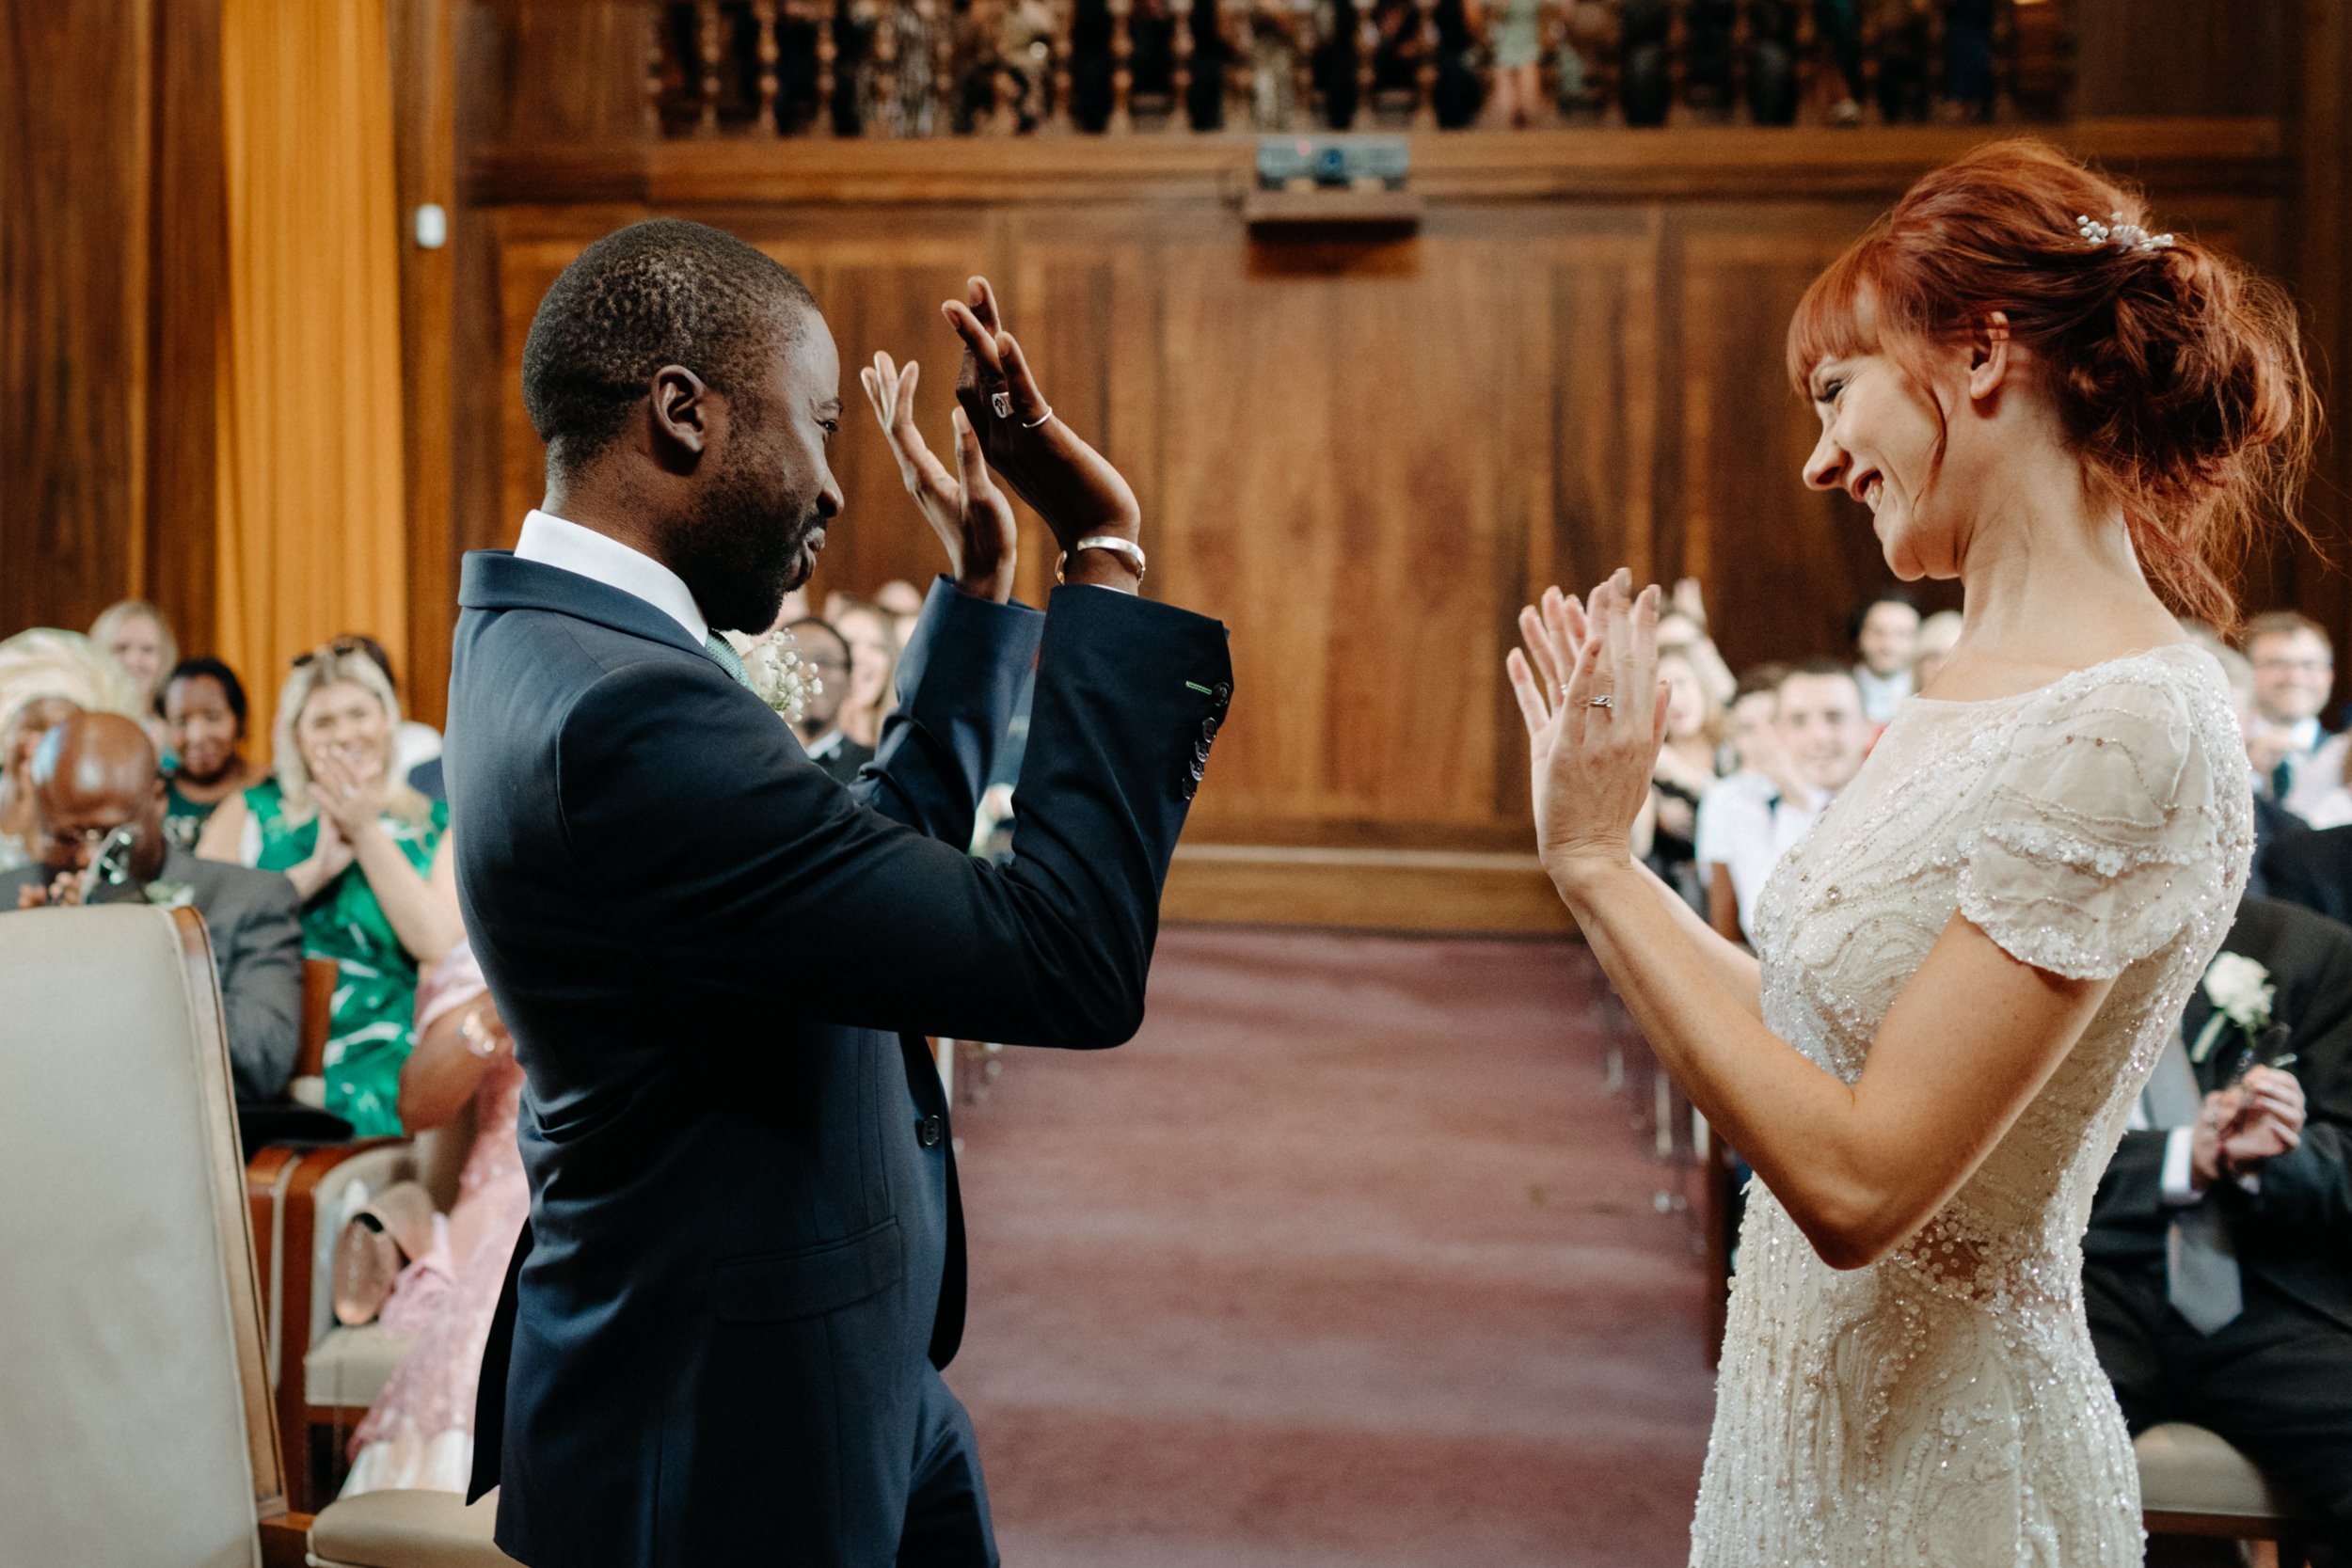  A bride and groom celebrate by throwing their hands in the air after getting married in the council chamber in Stoke Newington Town Hall. 